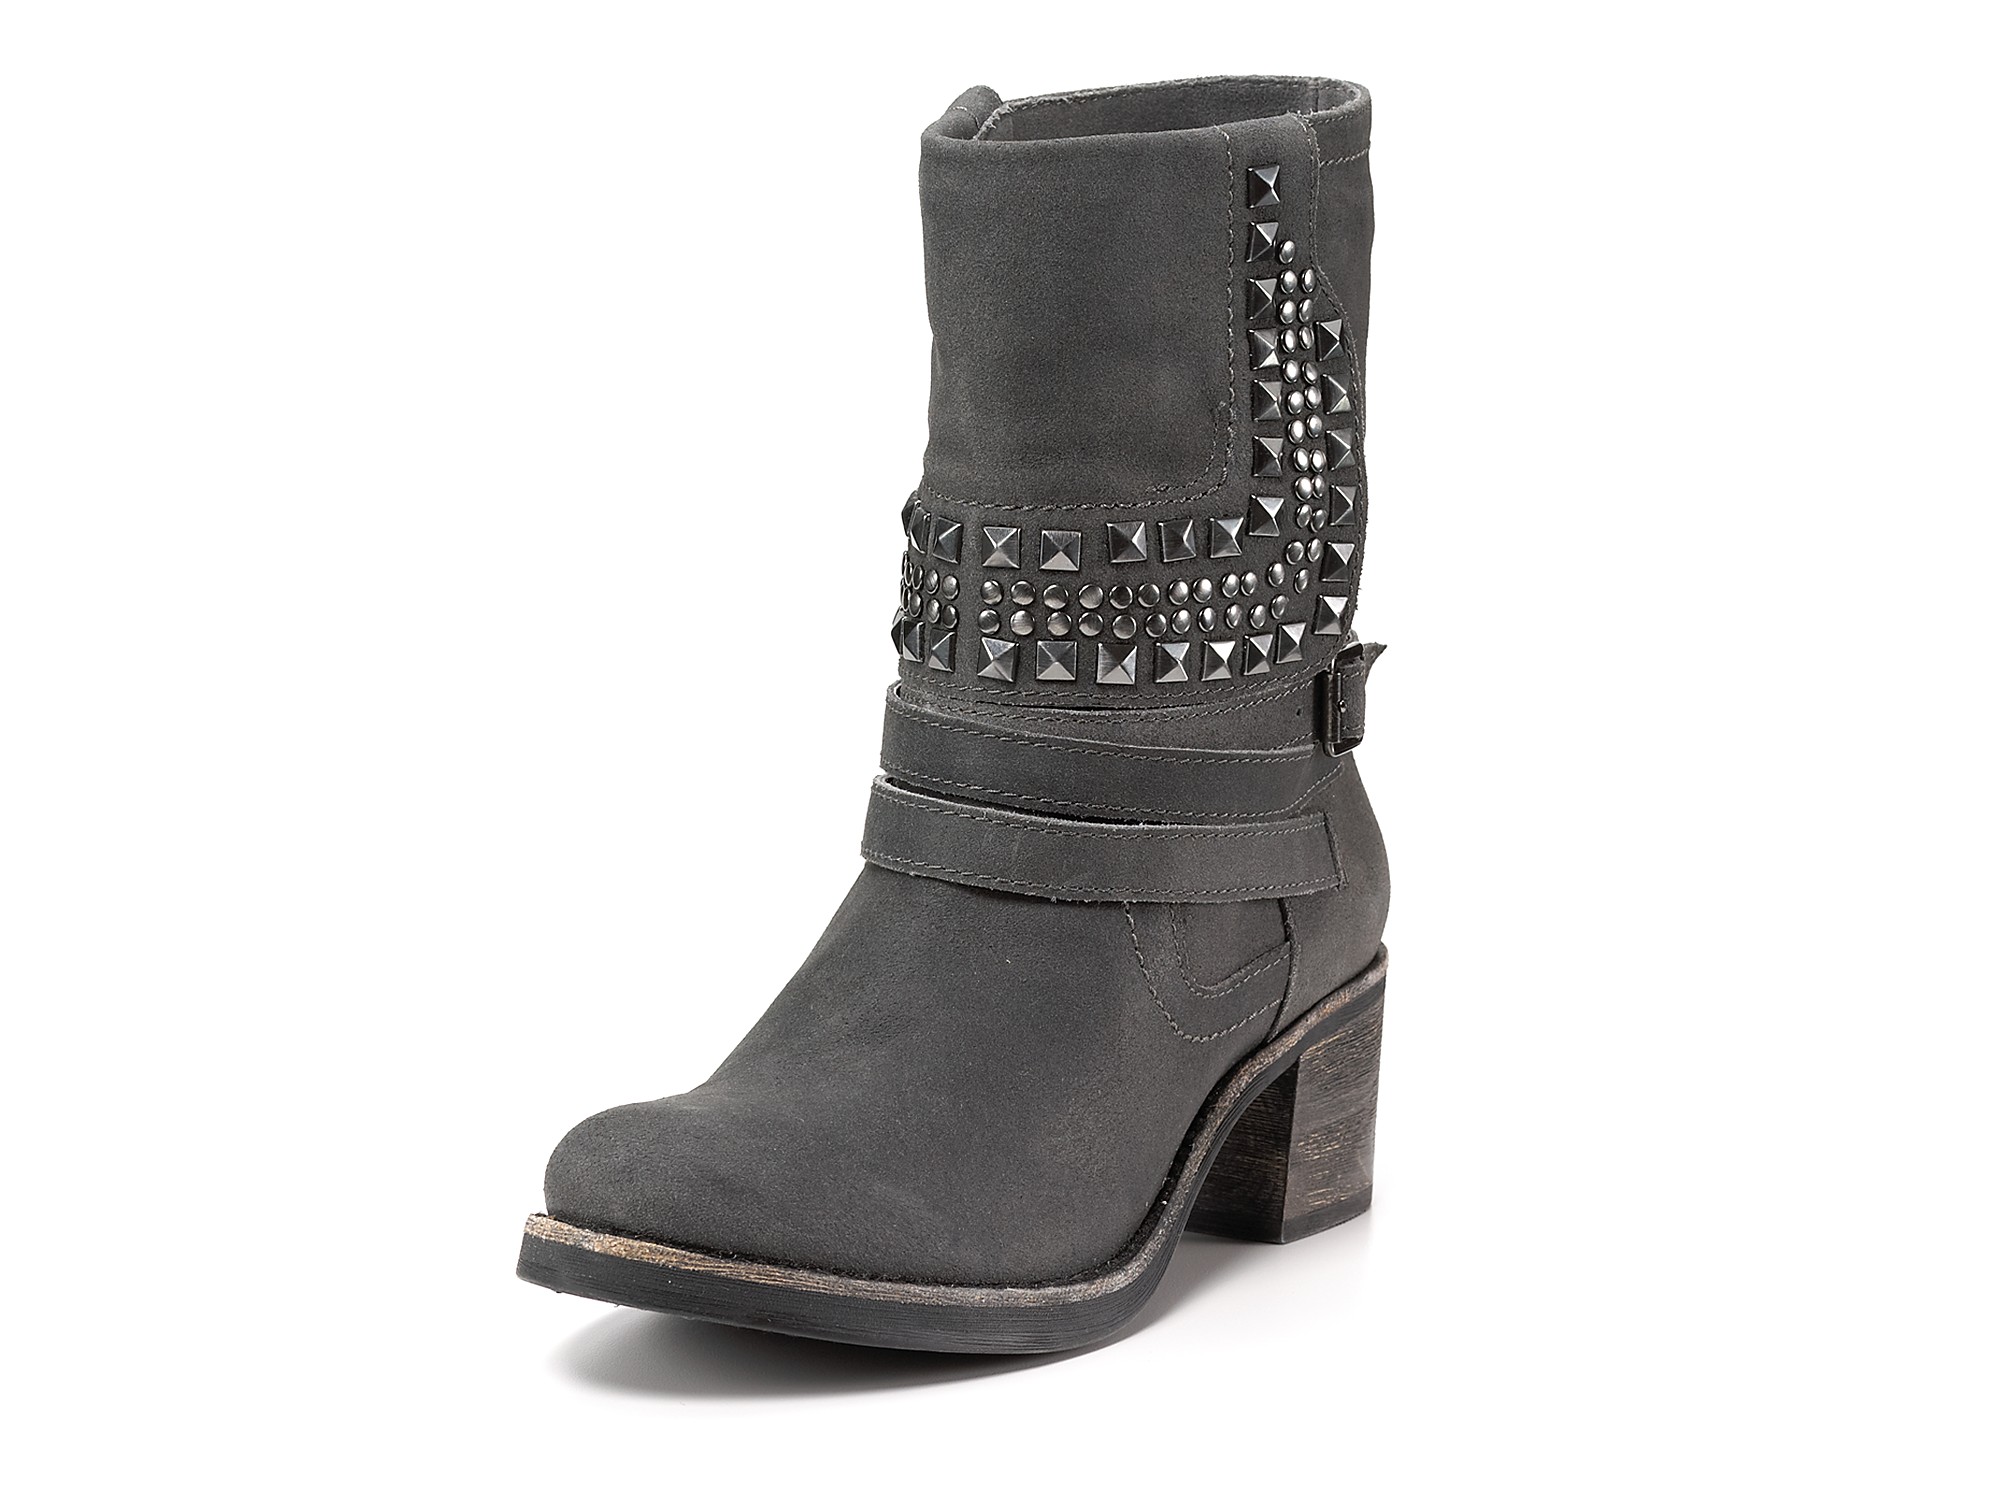 Vince Camuto Donato Moto Boots in Gray (new charcoal rough